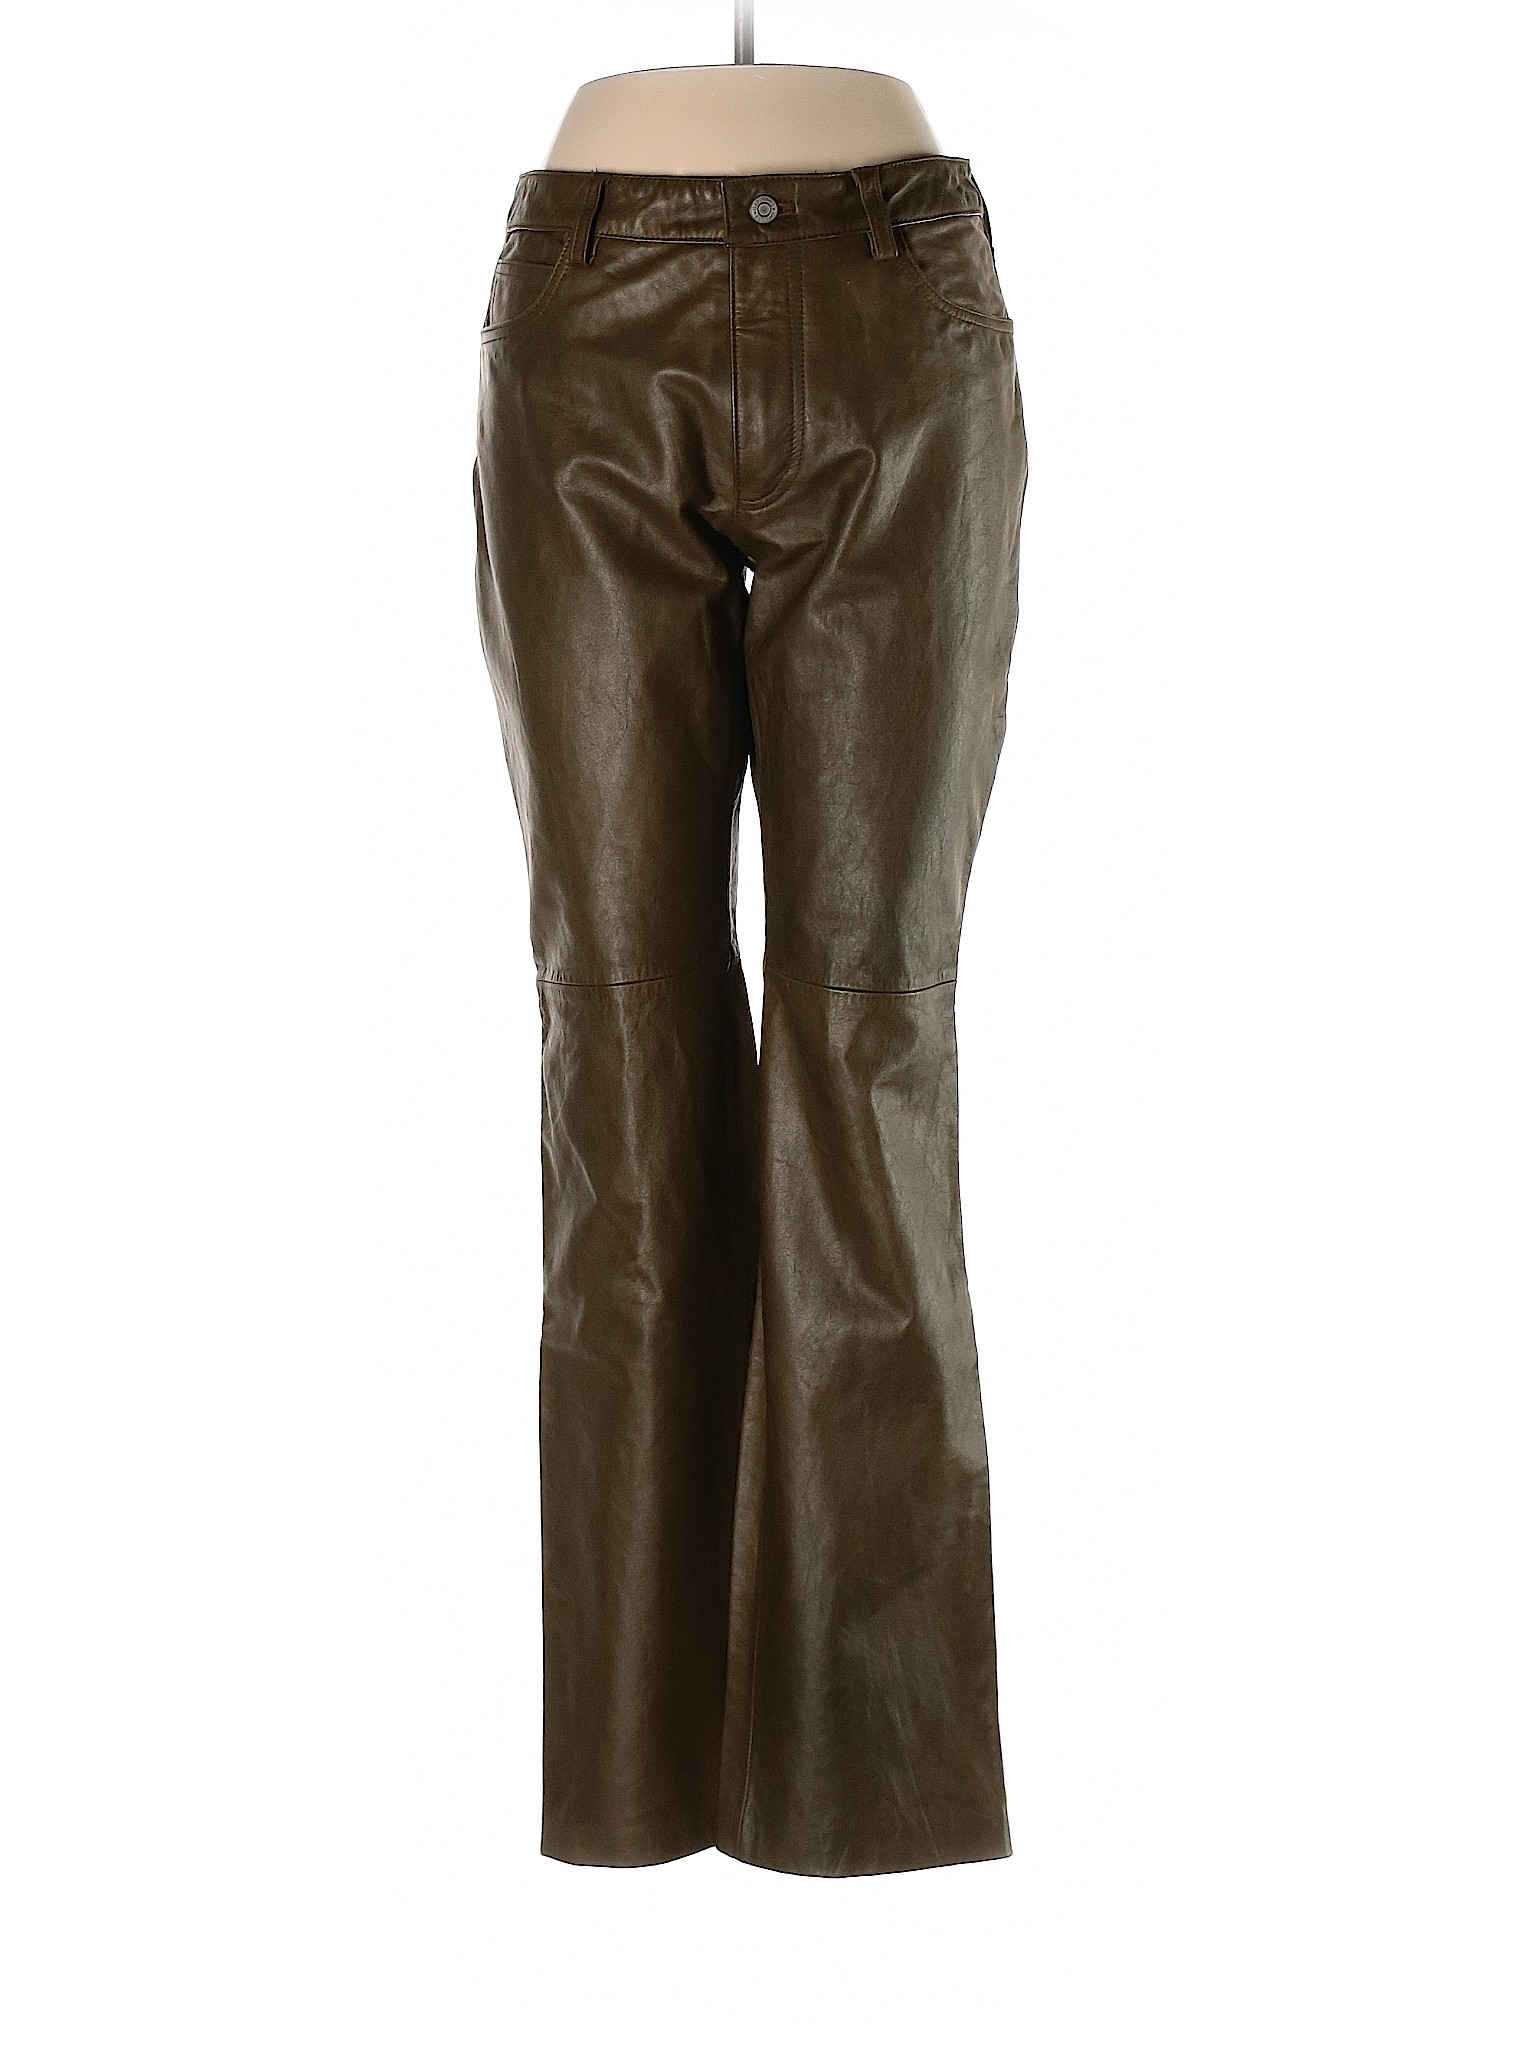 Gap 100% Leather Green Leather Pants Size 8 - 79% off | ThredUp